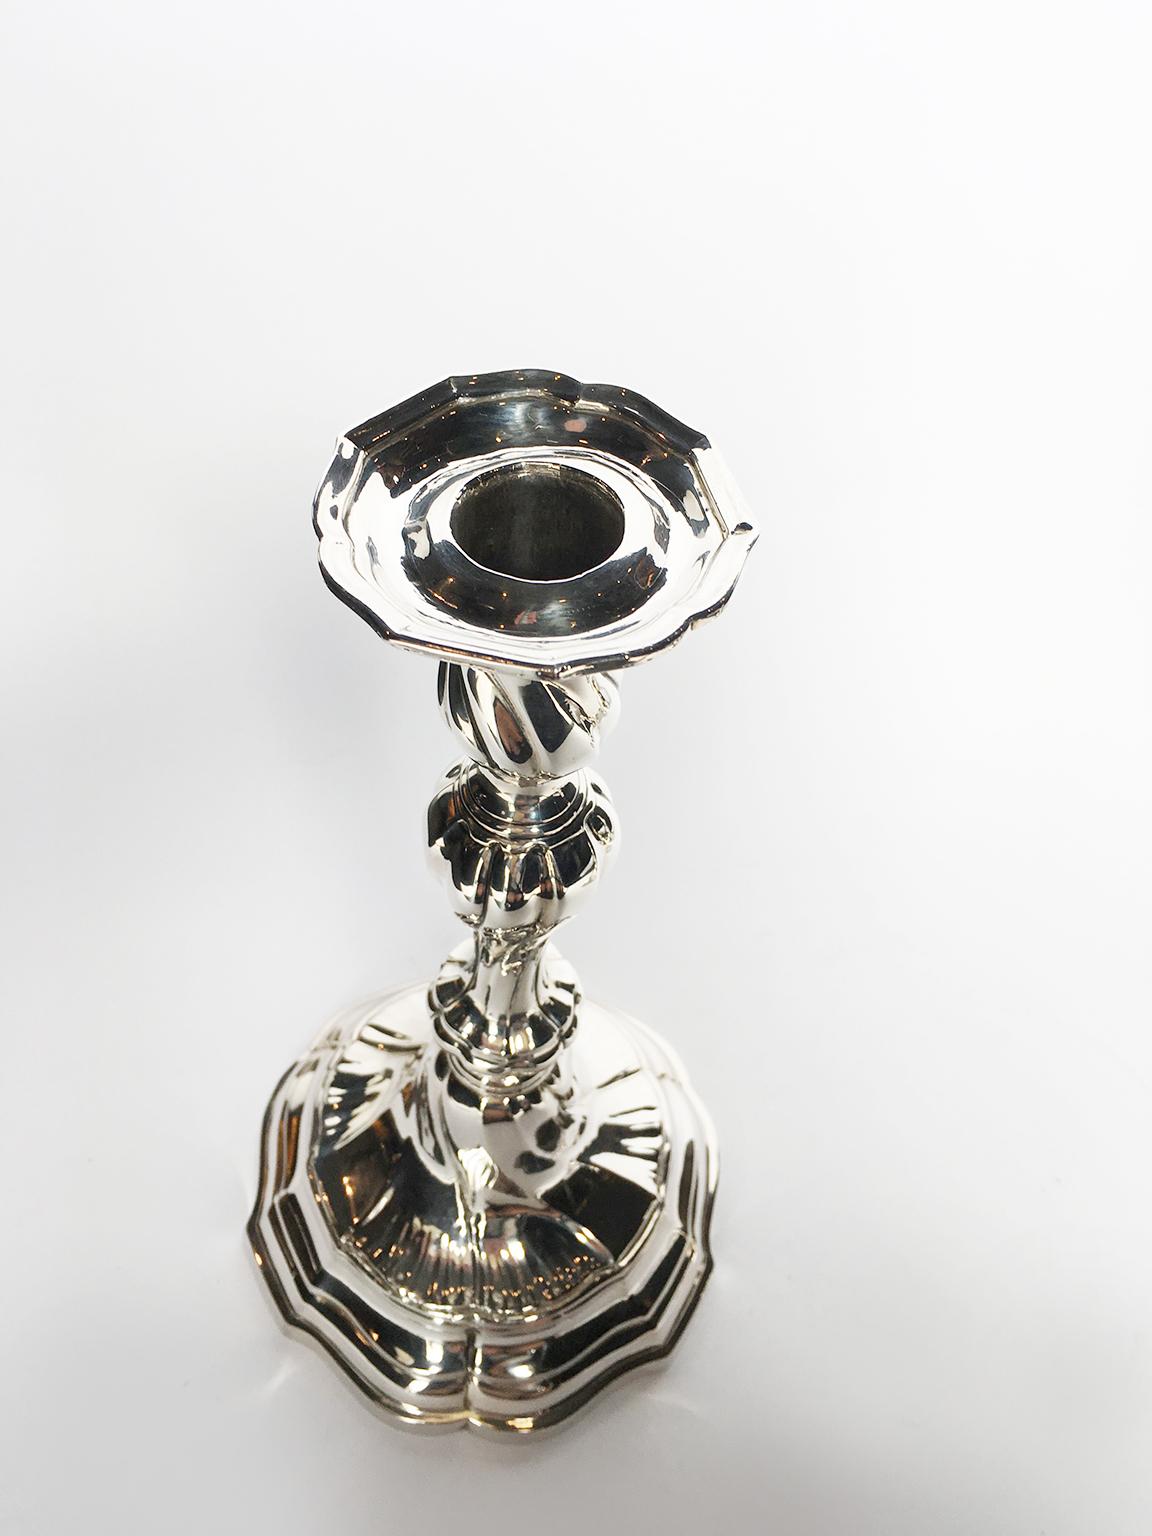 Late 18th Century Pair of Antique Italian Sterling Silver Candlesticks/Candleholders, circa 1770